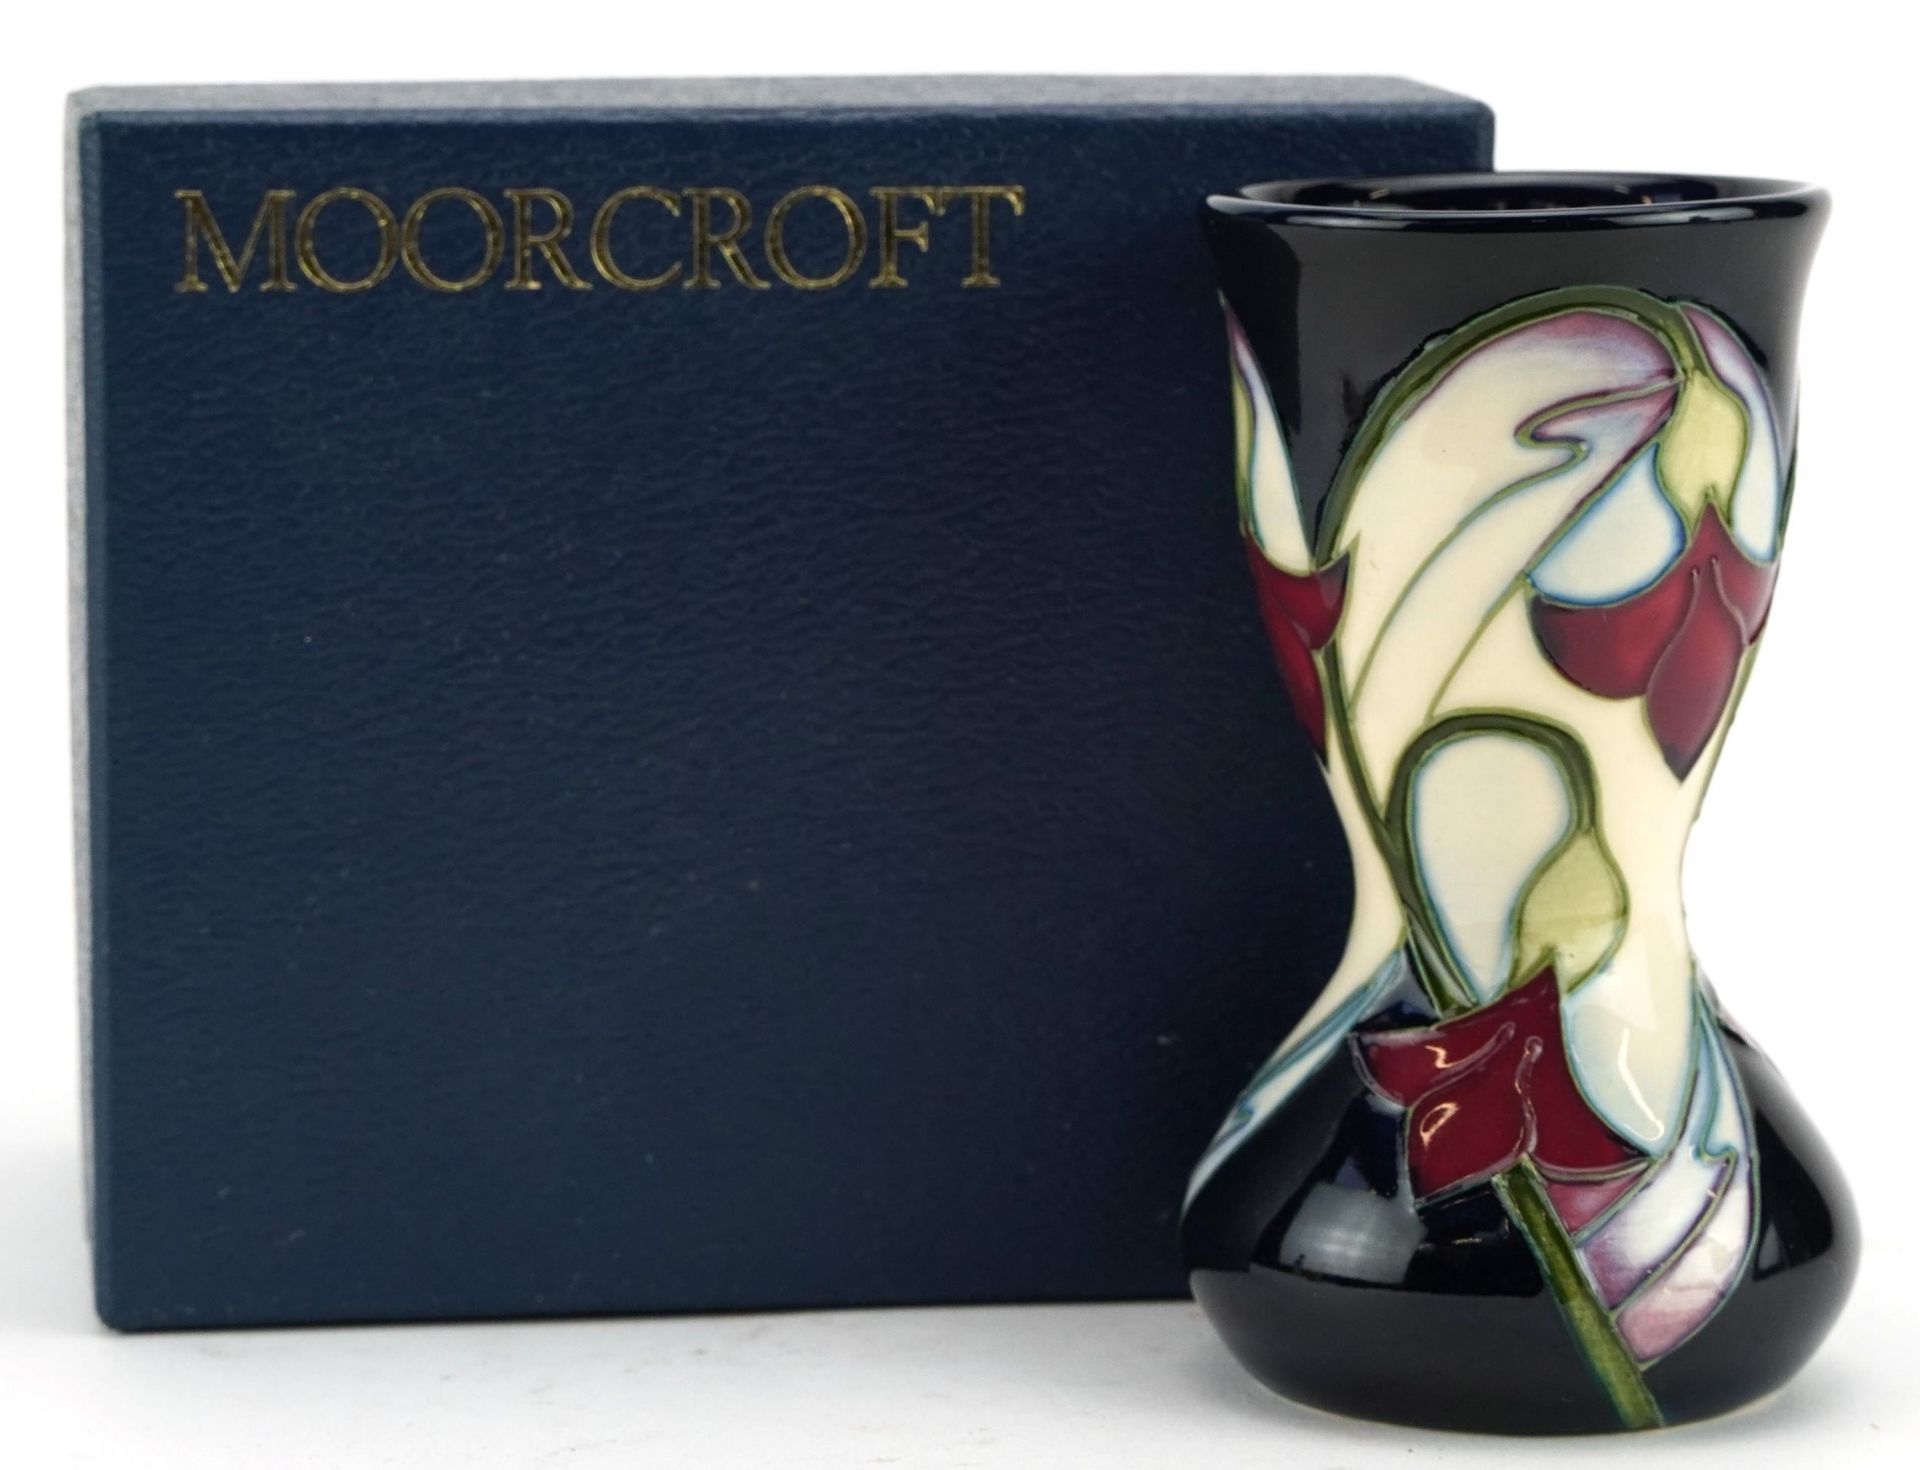 Moorcroft pottery vase hand painted with stylised flowers, dated 2006, with box, 11cm high